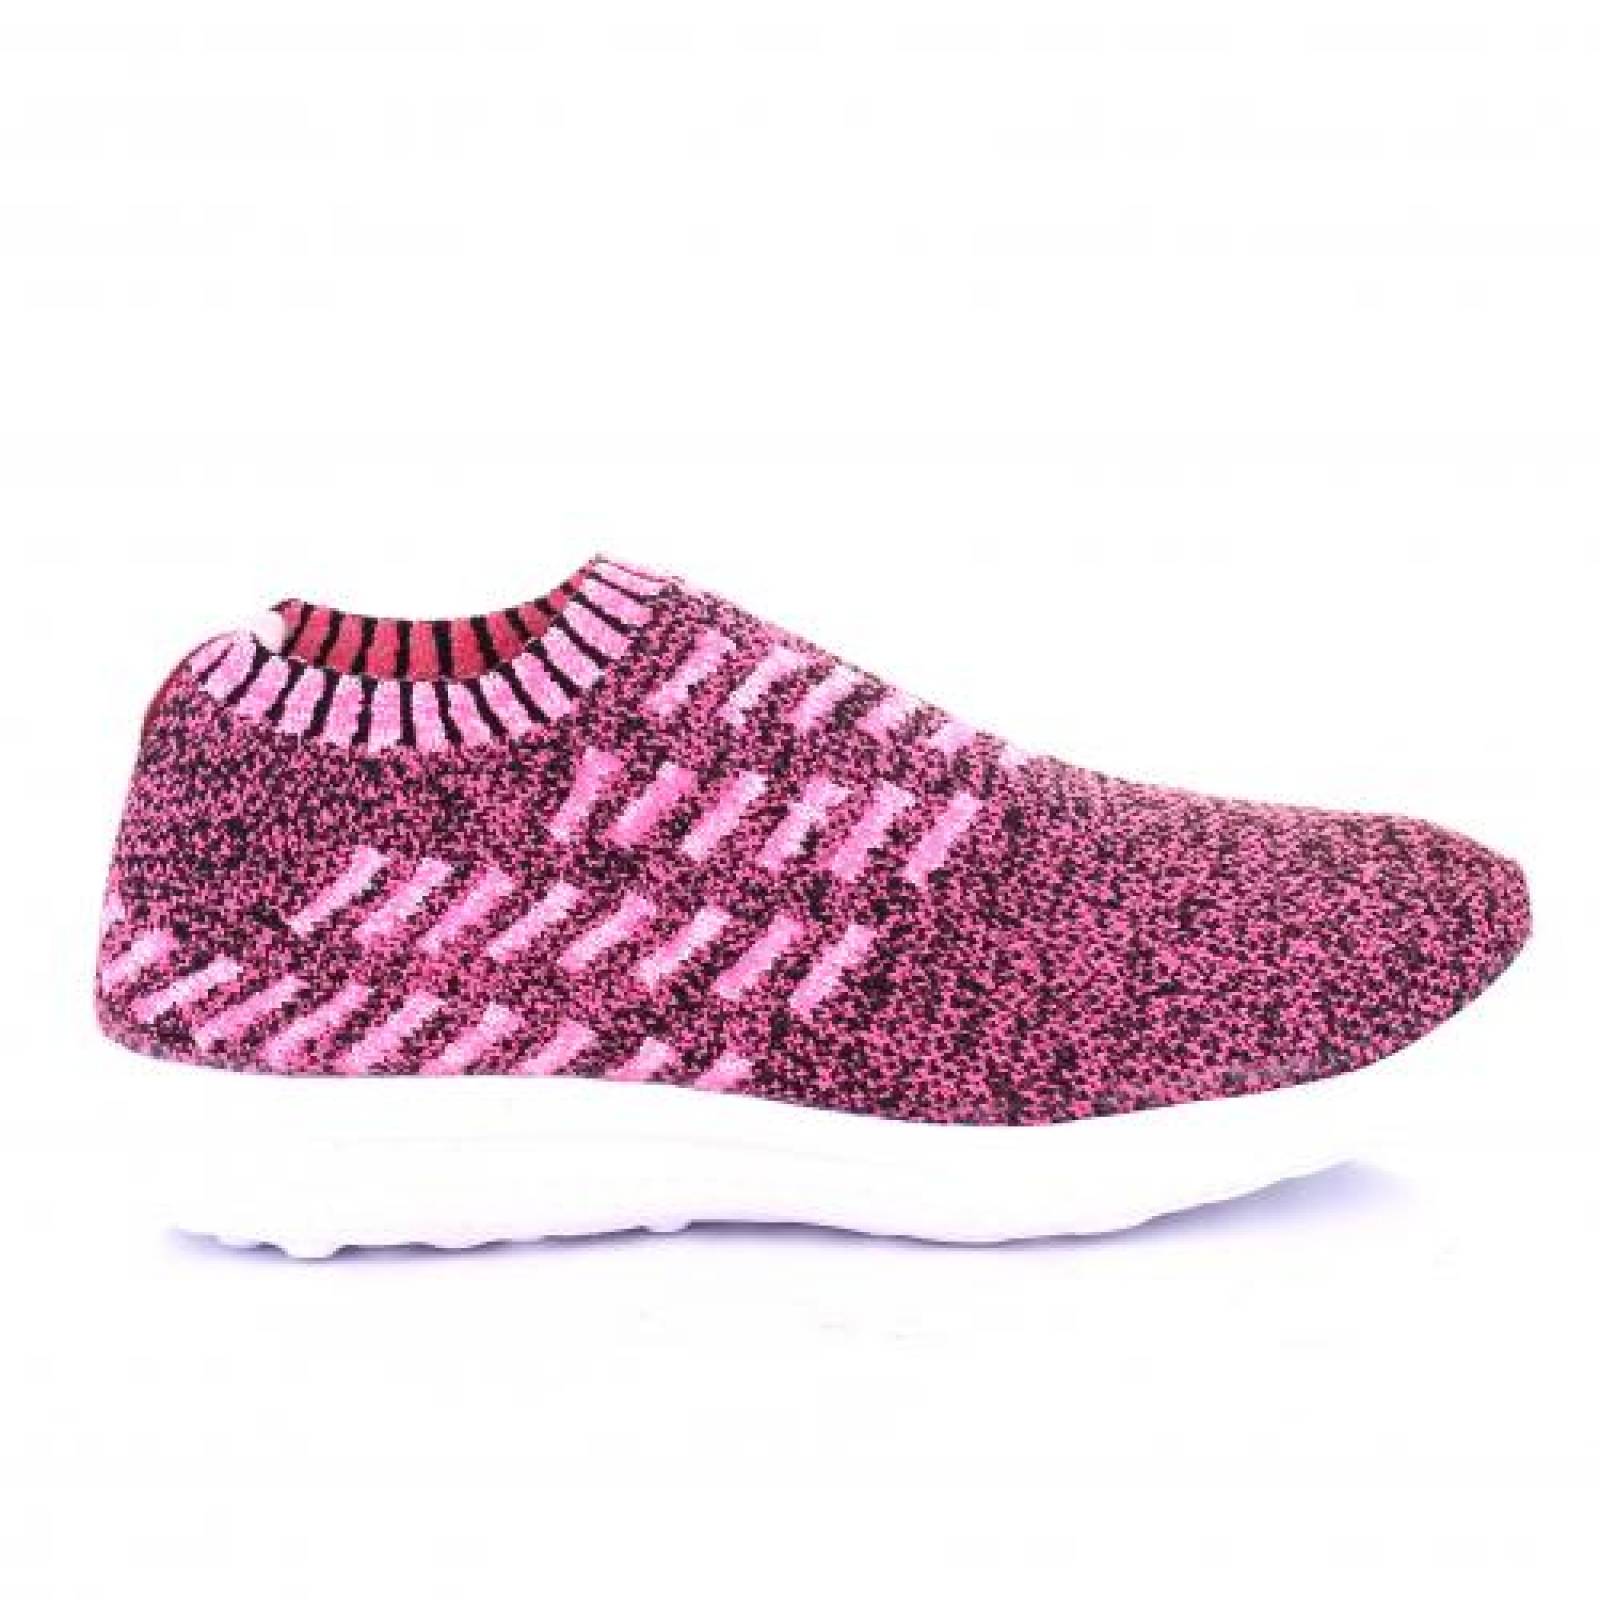 Tenis para Mujer Redberry 4300 053991 Color Lila   Fiusha